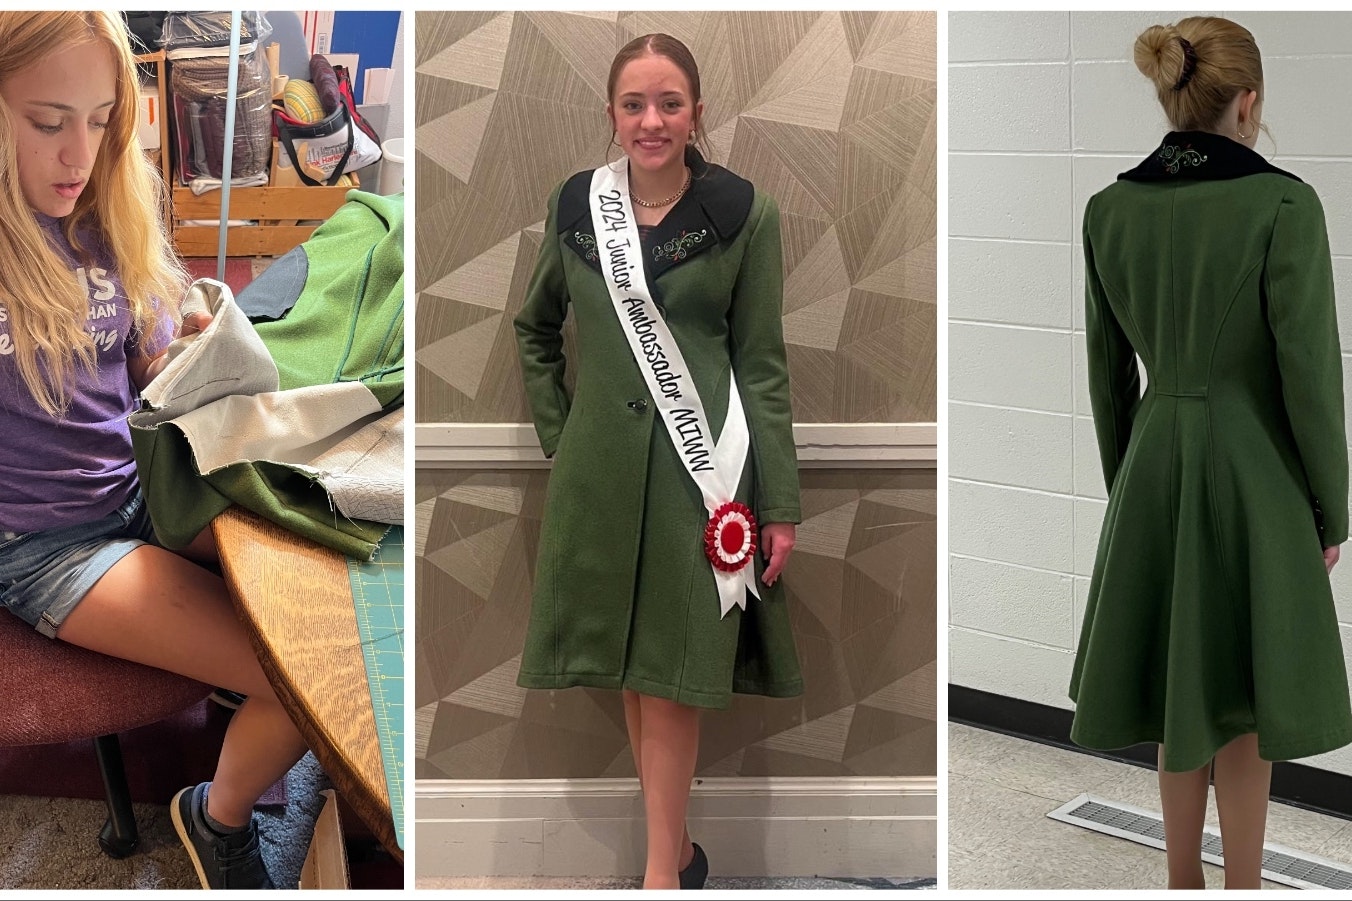 Carbon County 16-year-old Madi Dunning won the junior division of the National Make It With Wool competition with her stunning green coat.